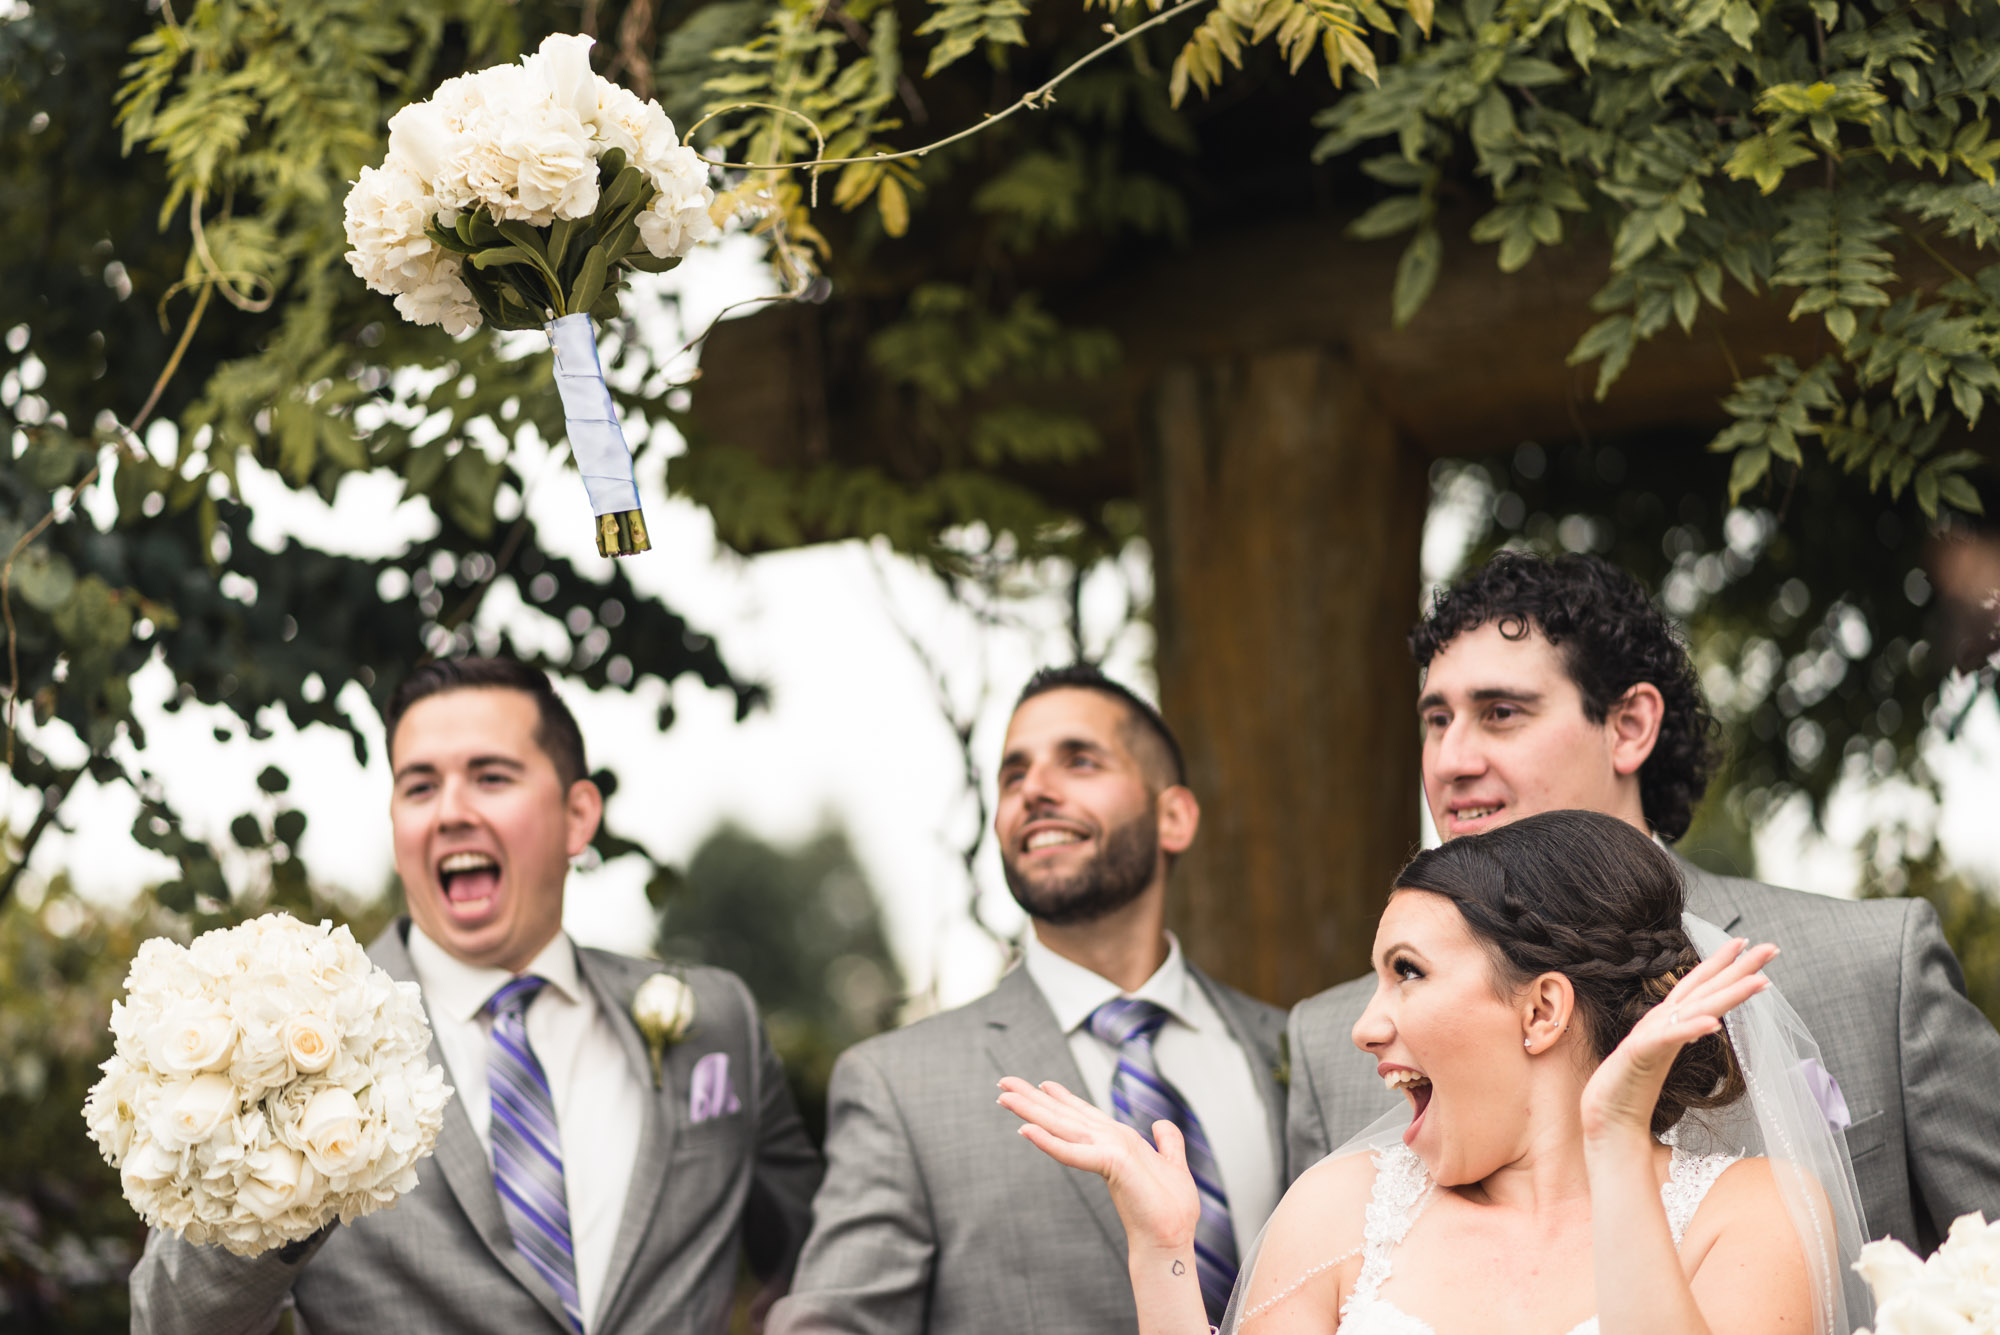 Groomsmen and Bride tossing bouquets